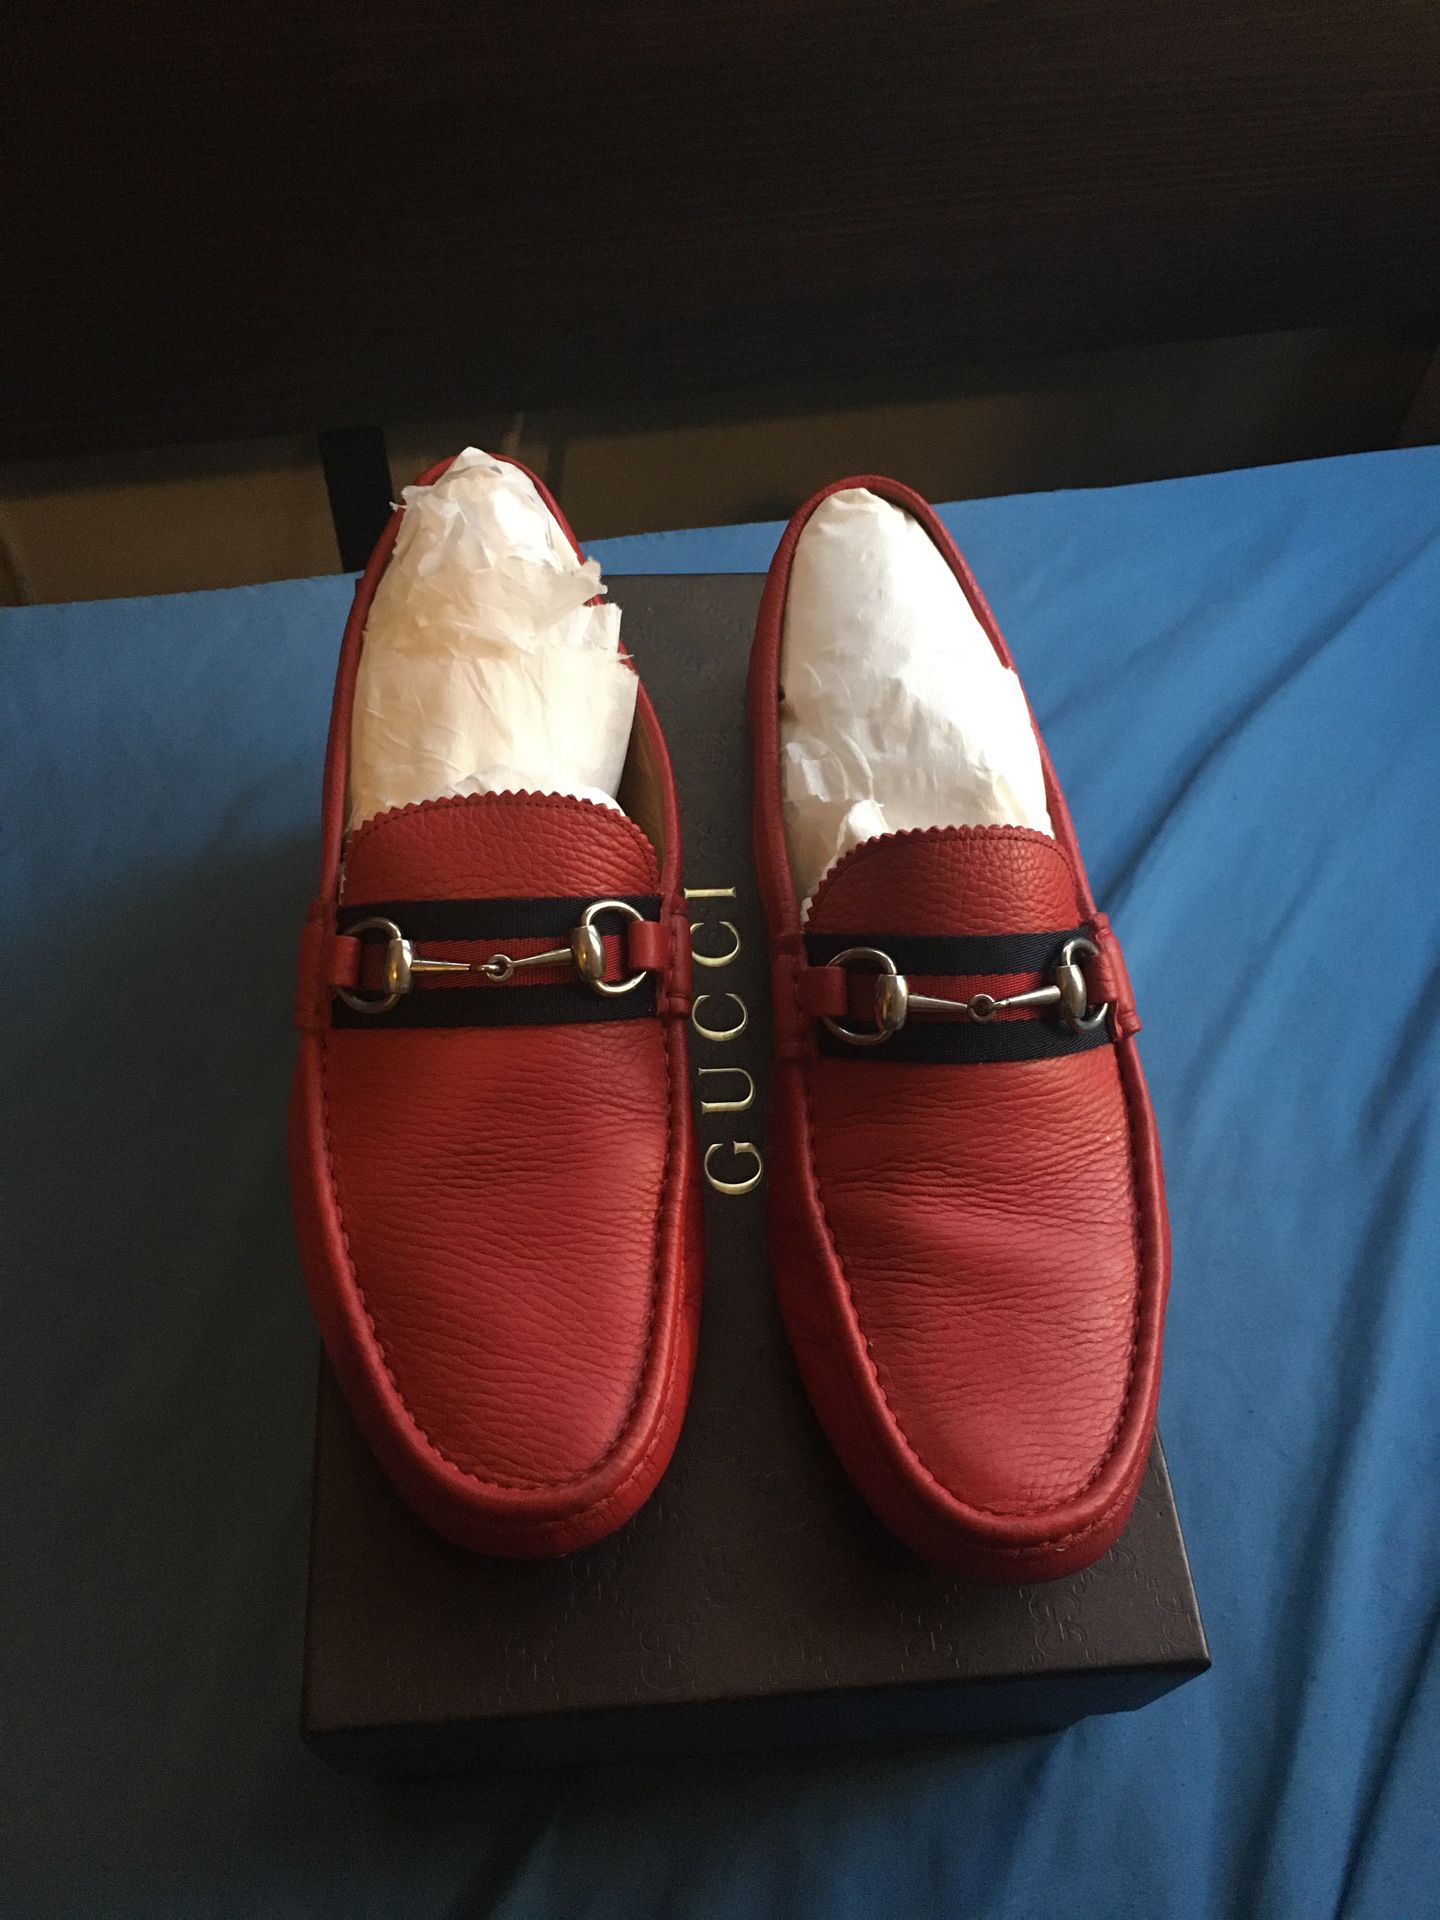 Men Gucci red loafers size 10us